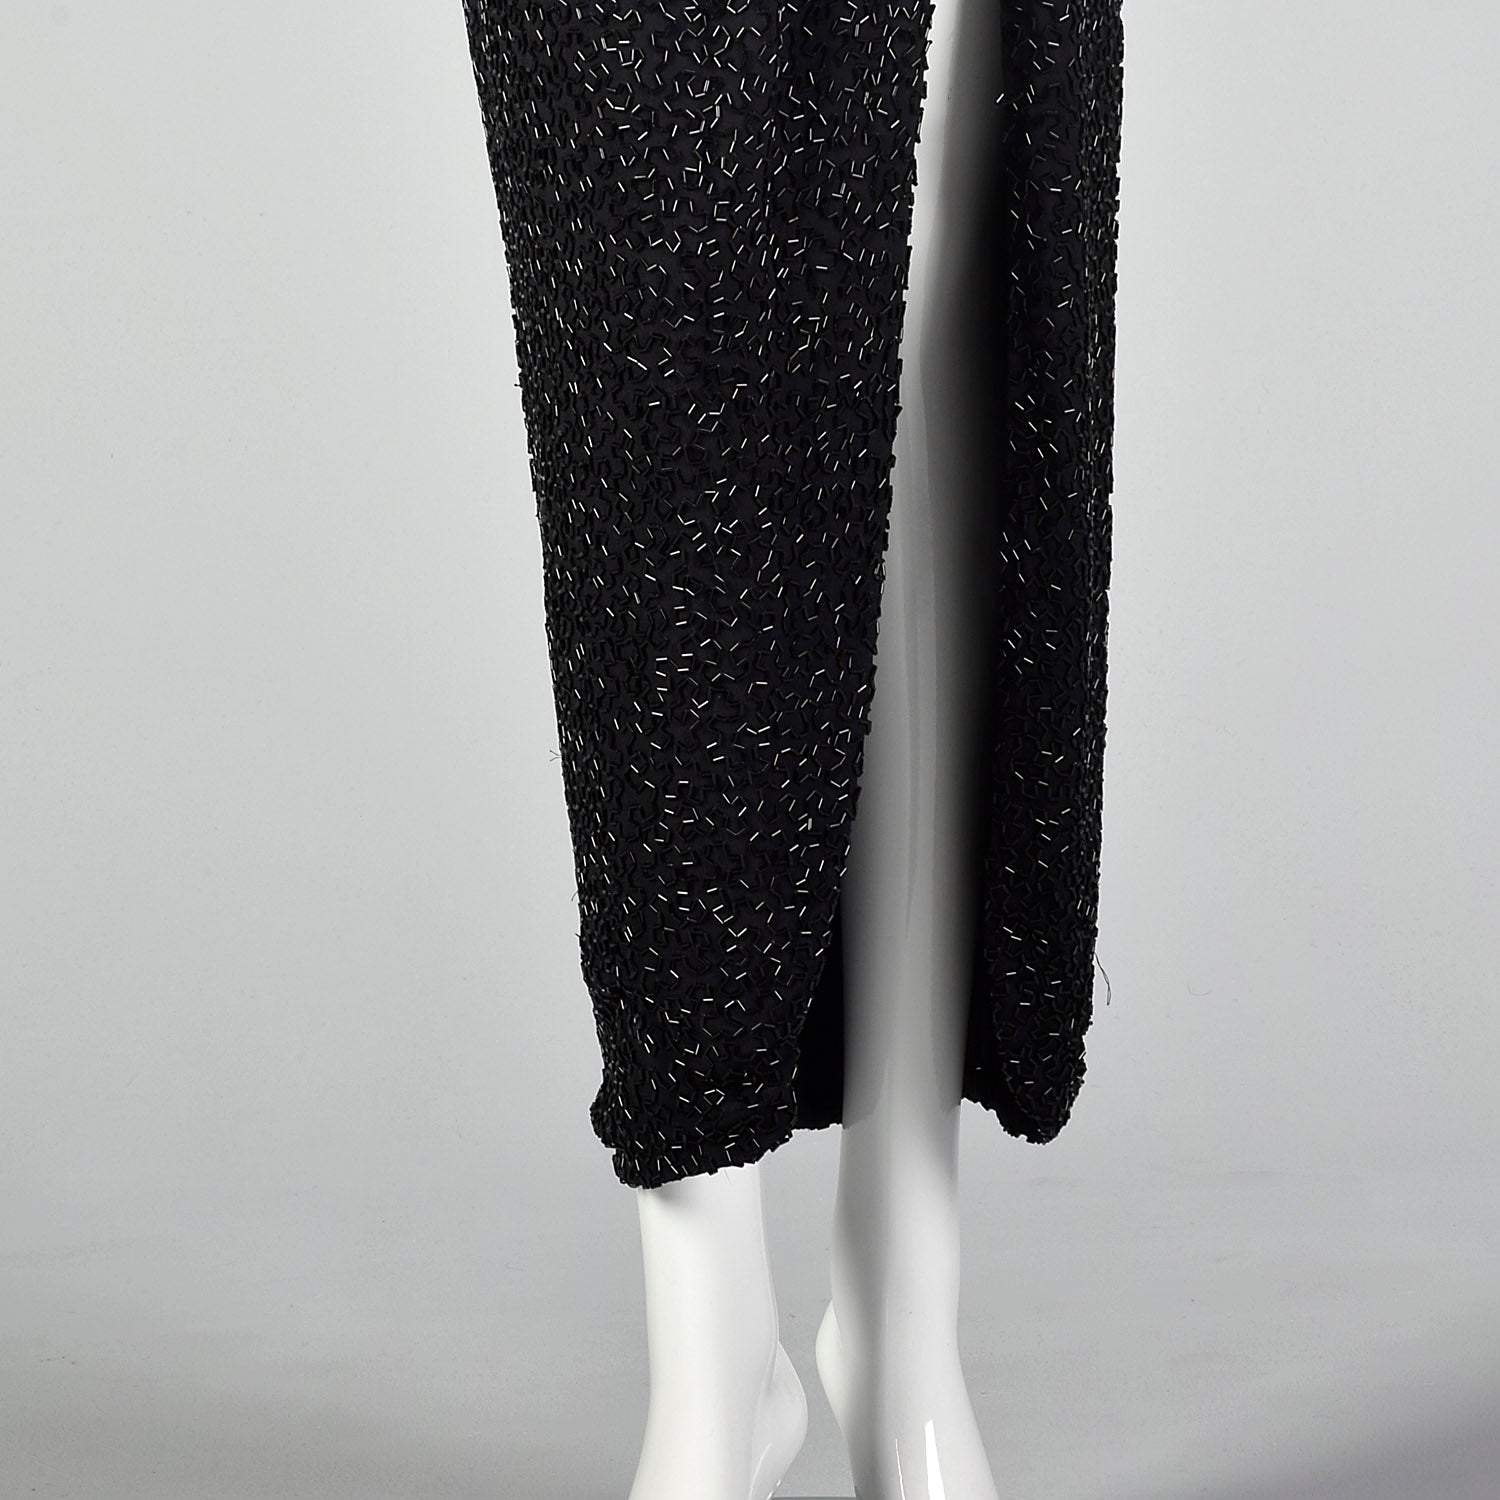 XS Lillie Rubin 1970s Black and White Beaded Gown